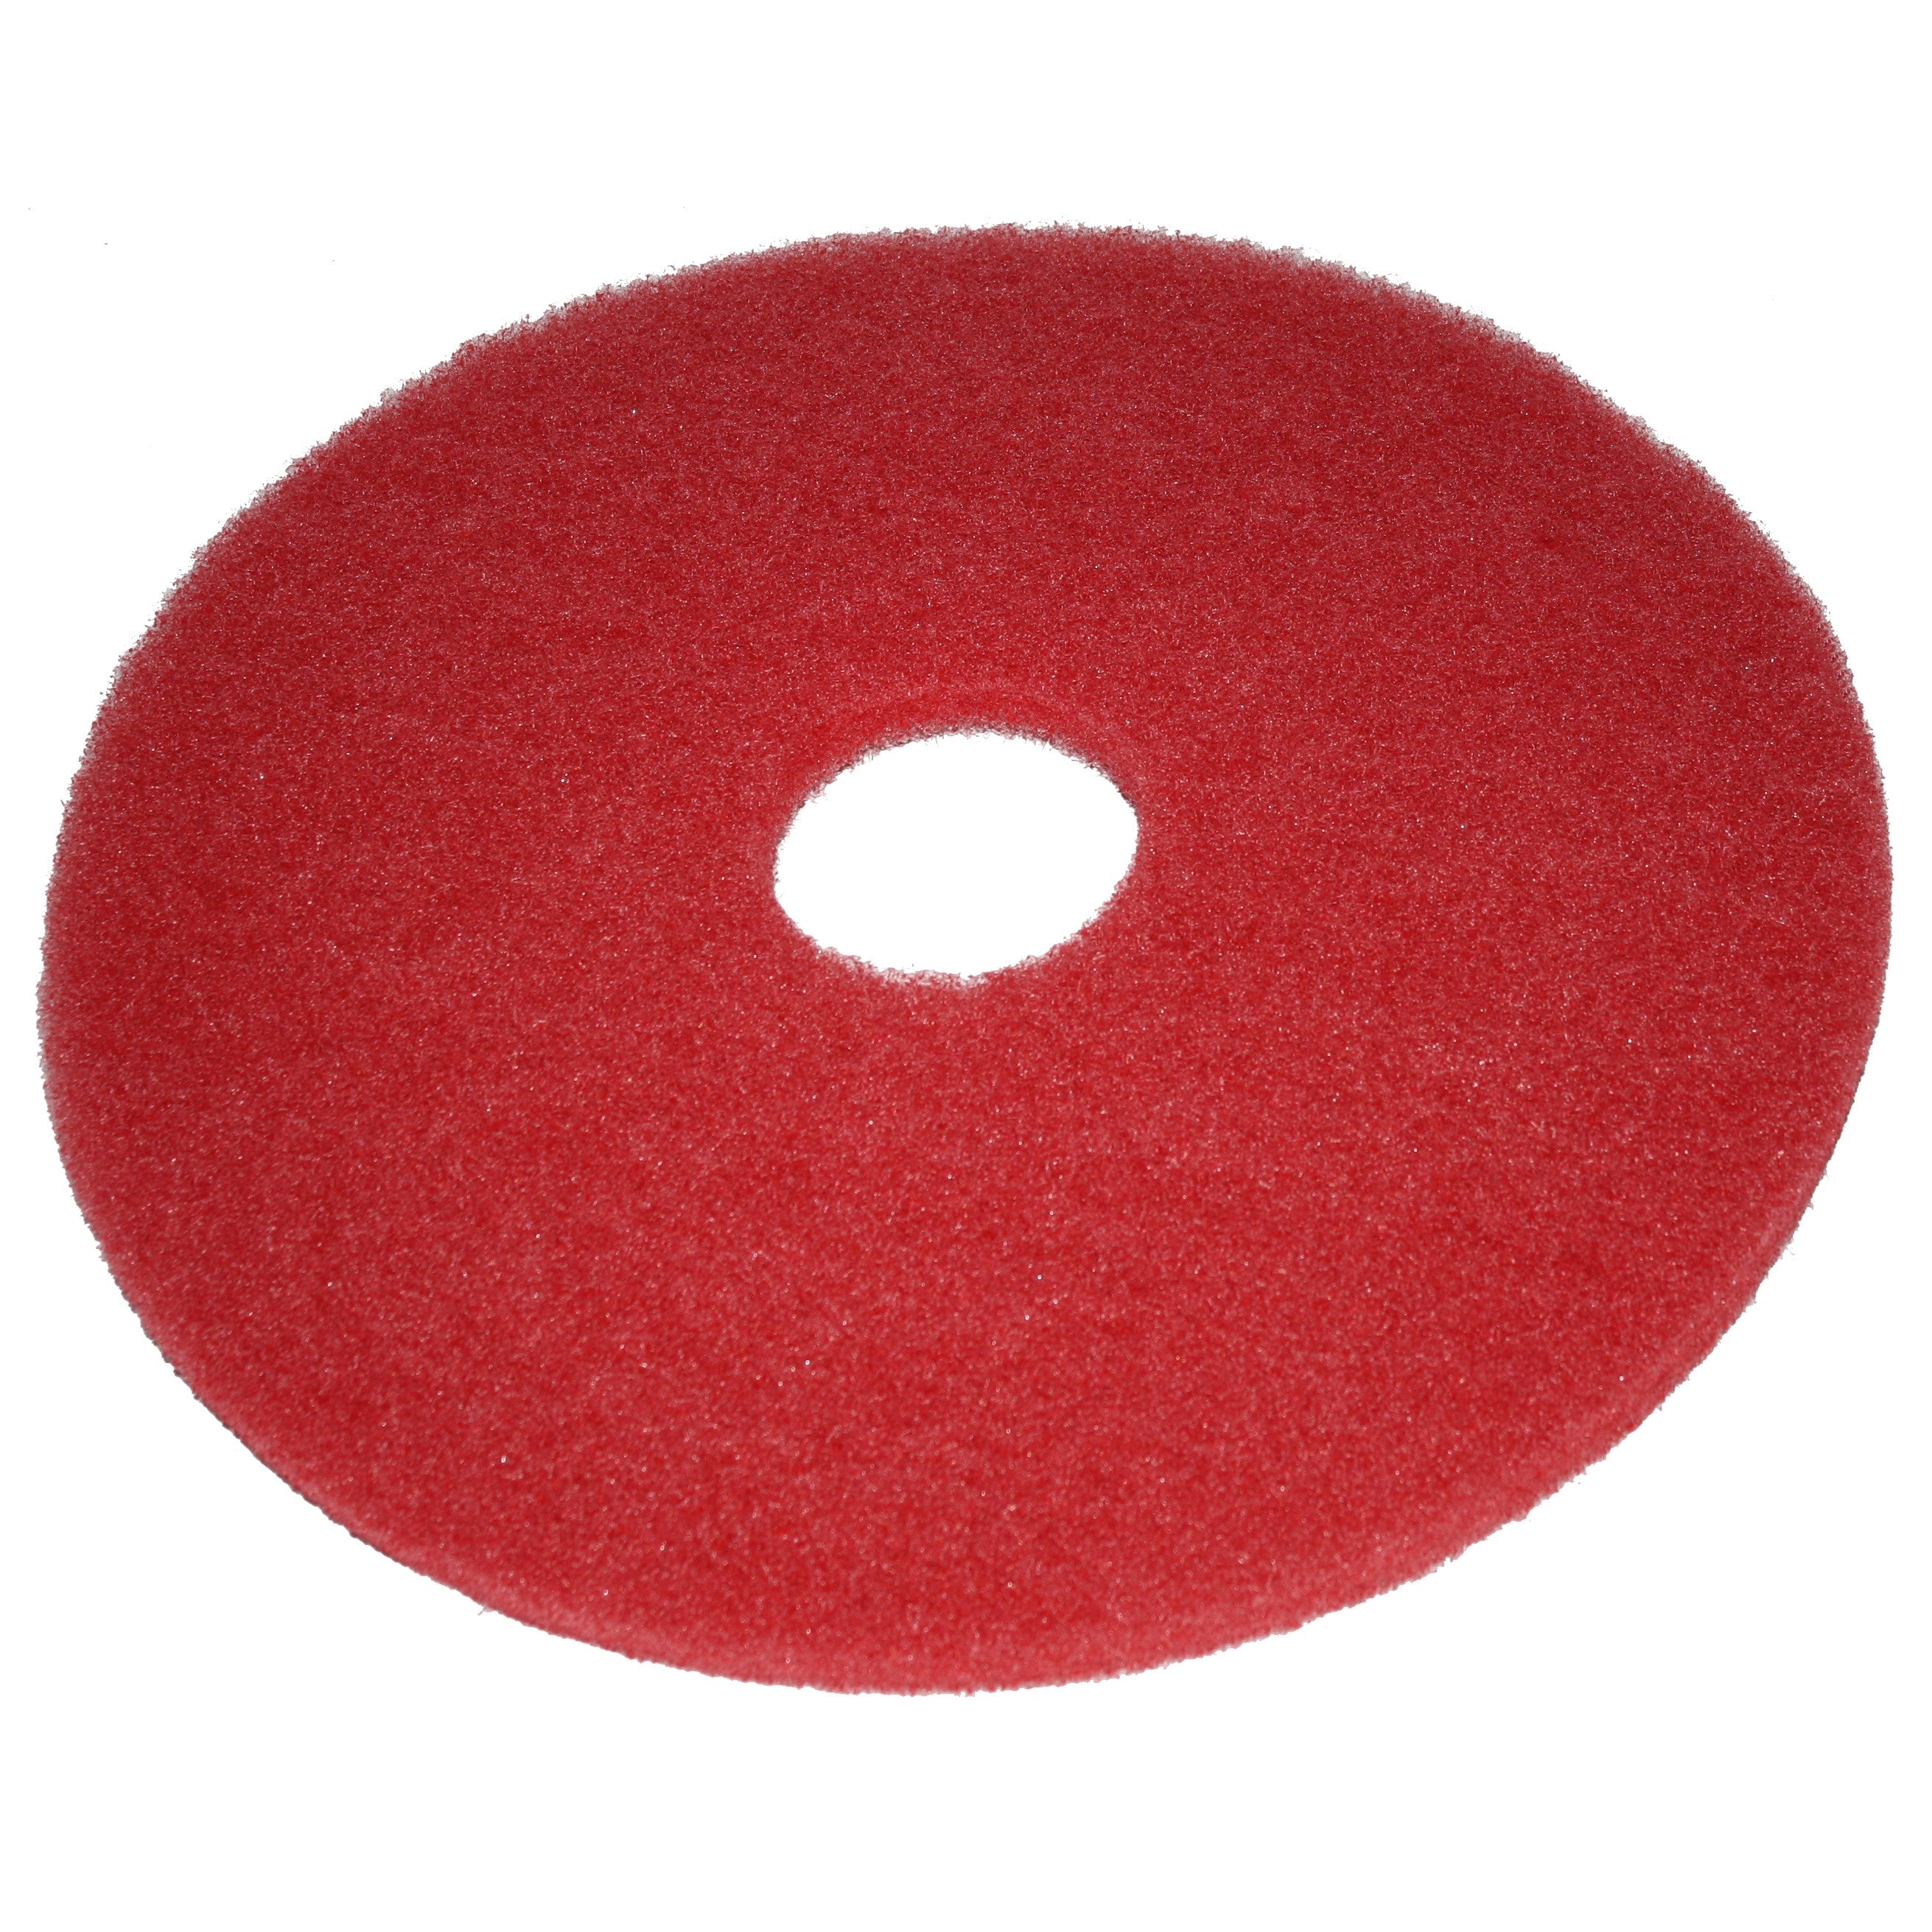 Pad rouge, Ø 457 mm, polyester